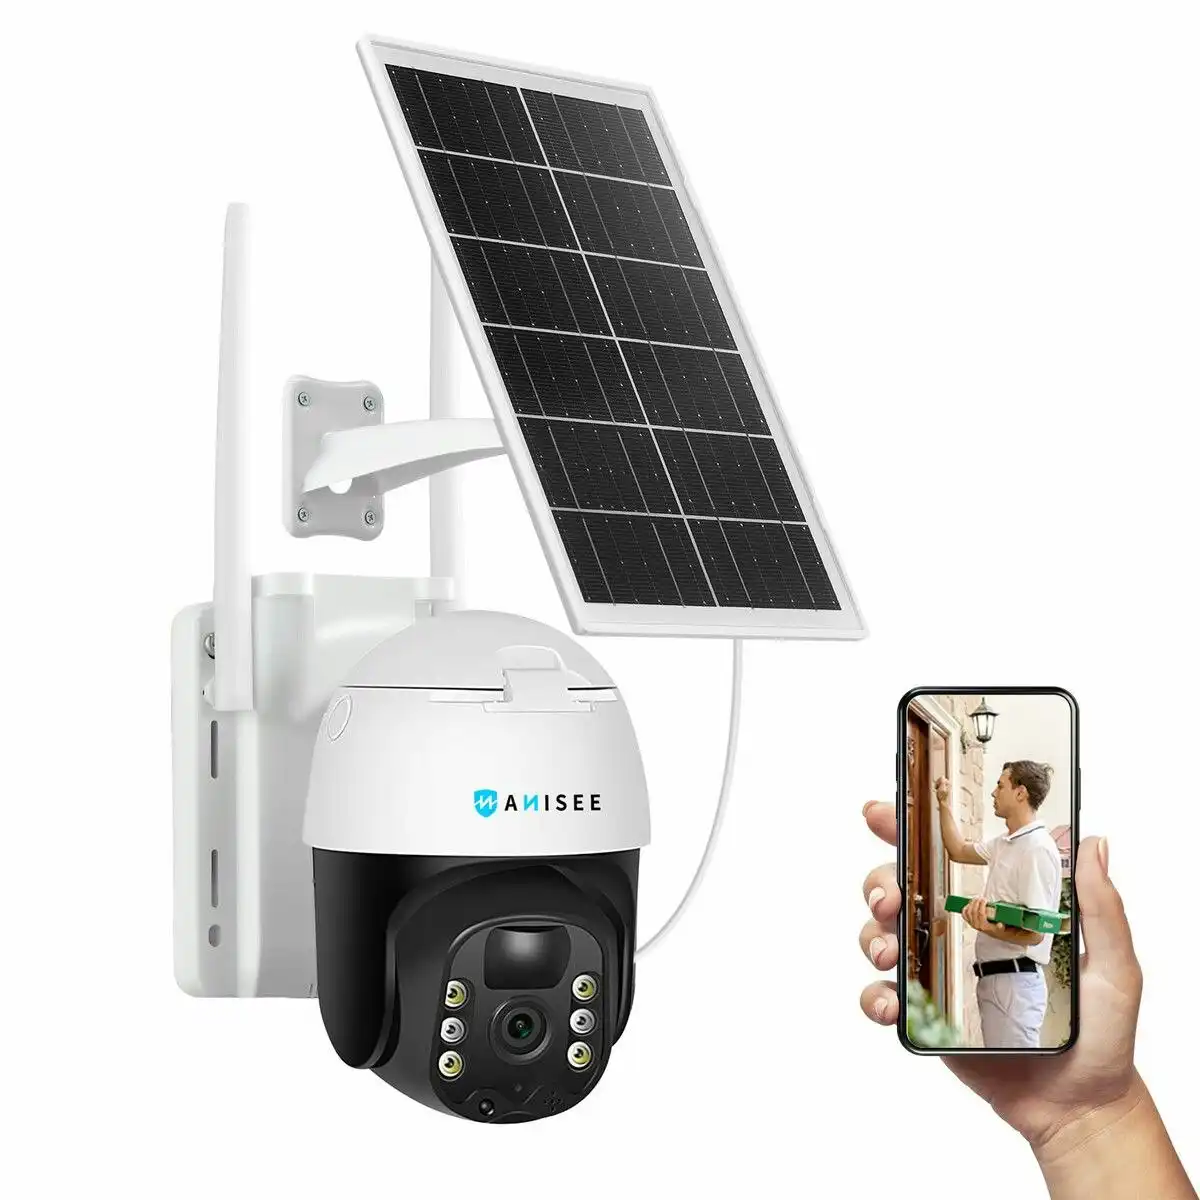 Anisee Solar Security Camera Wireless Outdoor CCTV WiFi Home Surveillance System 4MP PTZ Remote 2 Way Audio Color Night Vision